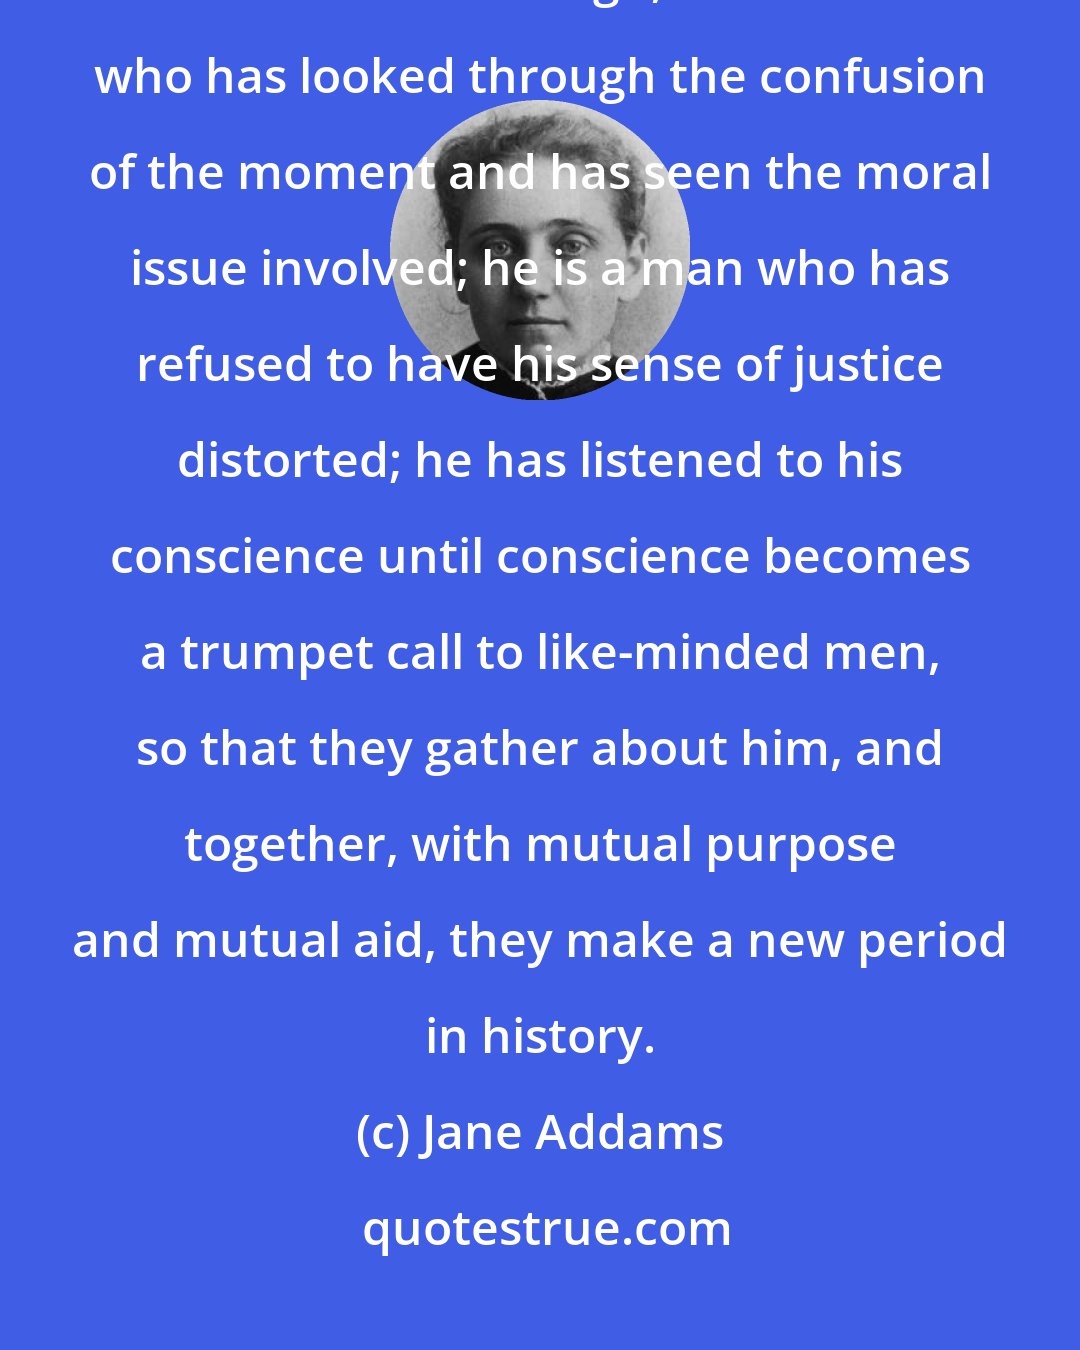 Jane Addams: What is a great man who has made his mark upon history? Every time, if we think far enough, he is a man who has looked through the confusion of the moment and has seen the moral issue involved; he is a man who has refused to have his sense of justice distorted; he has listened to his conscience until conscience becomes a trumpet call to like-minded men, so that they gather about him, and together, with mutual purpose and mutual aid, they make a new period in history.